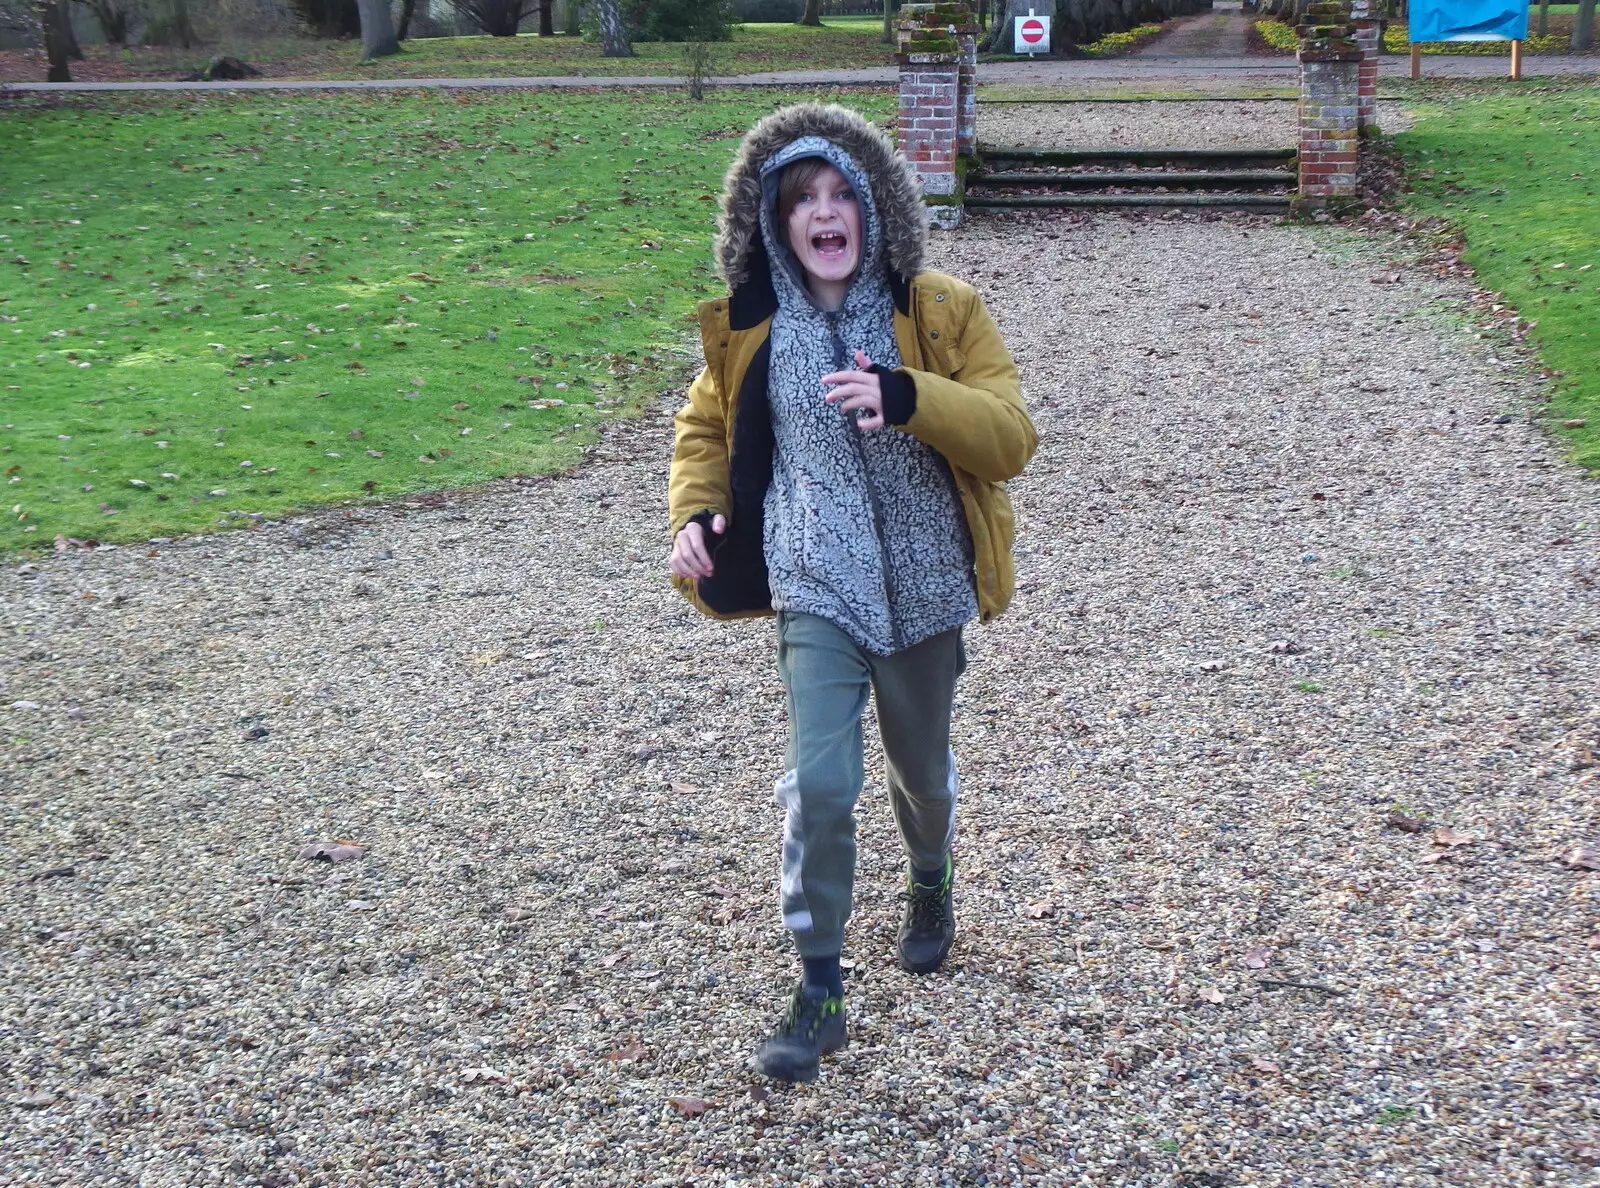 Harry runs around outside in the Oaksmere, from A Trip to Ampersand, Sawmills Road, Diss - 27th January 2023